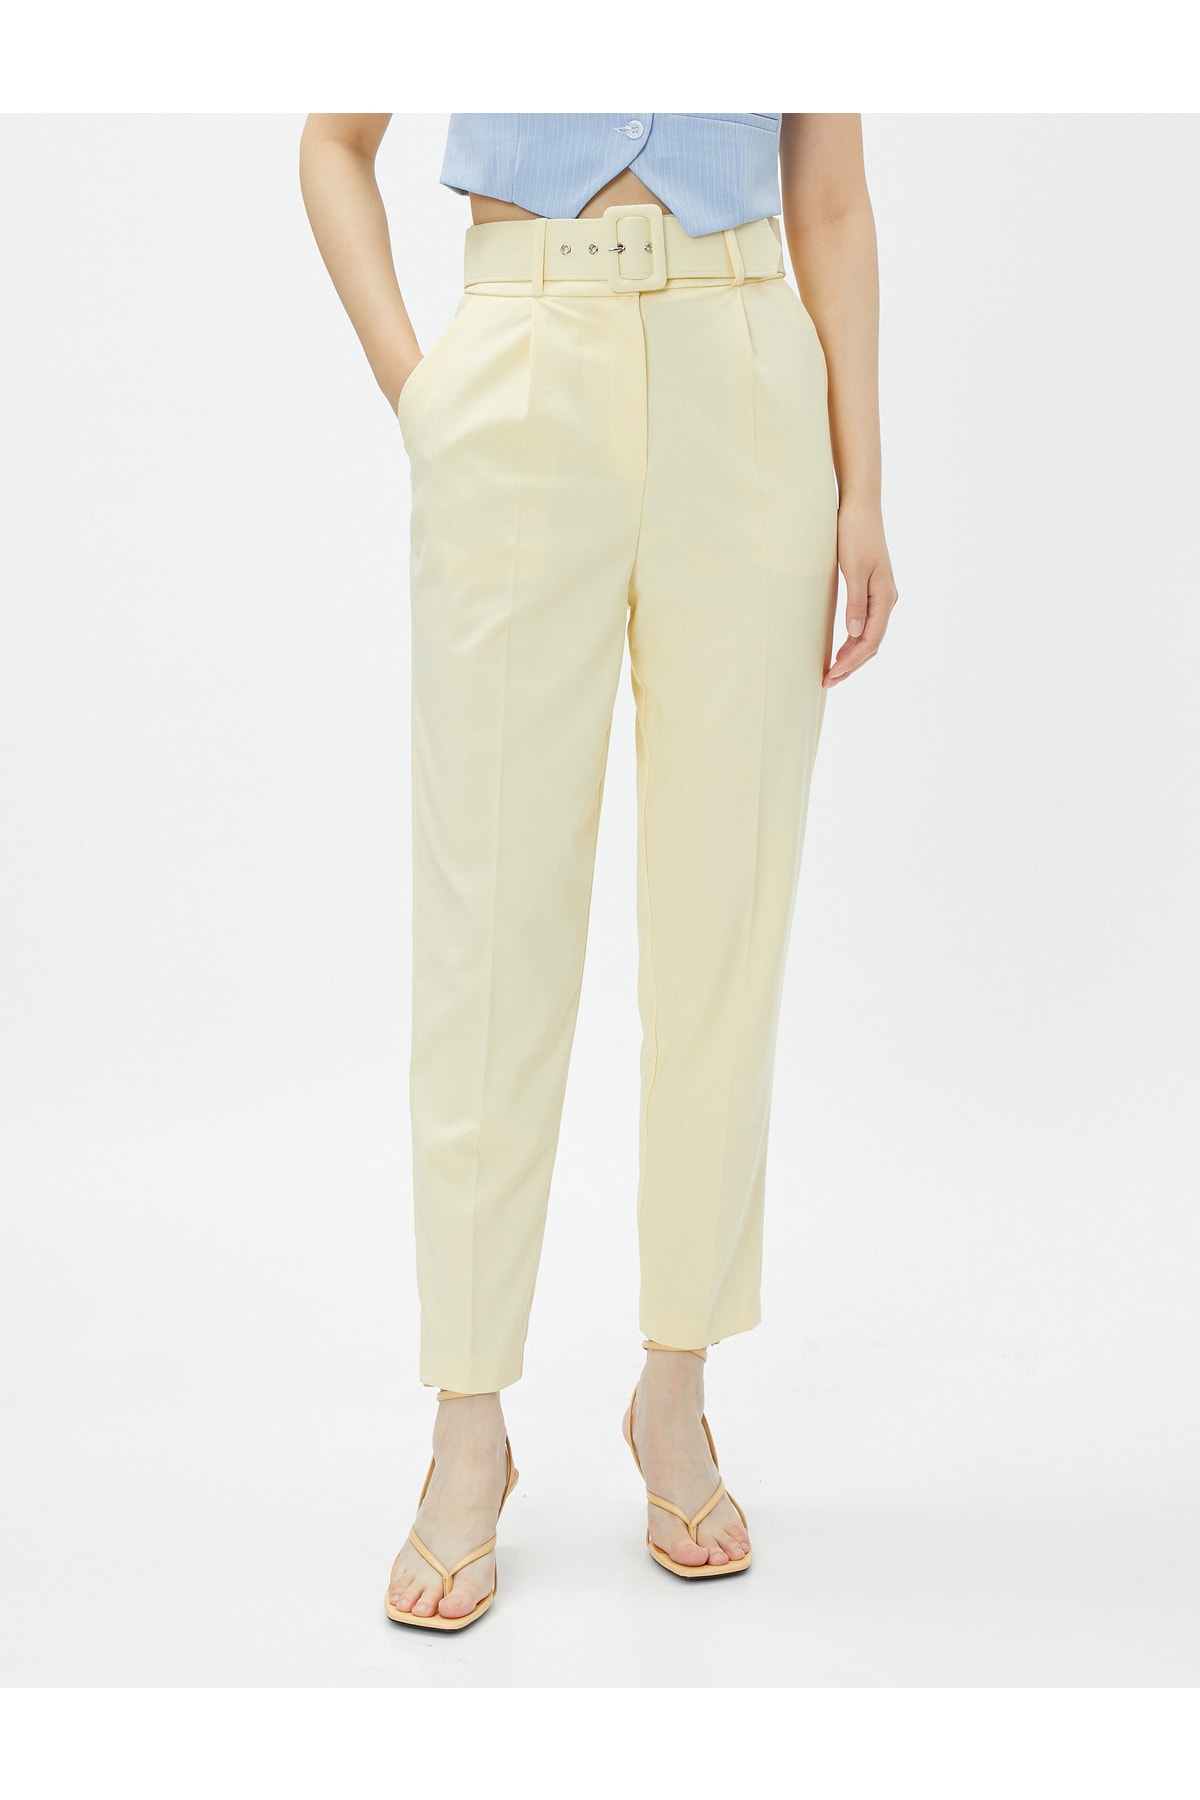 KOTON Belted Carrot Trousers